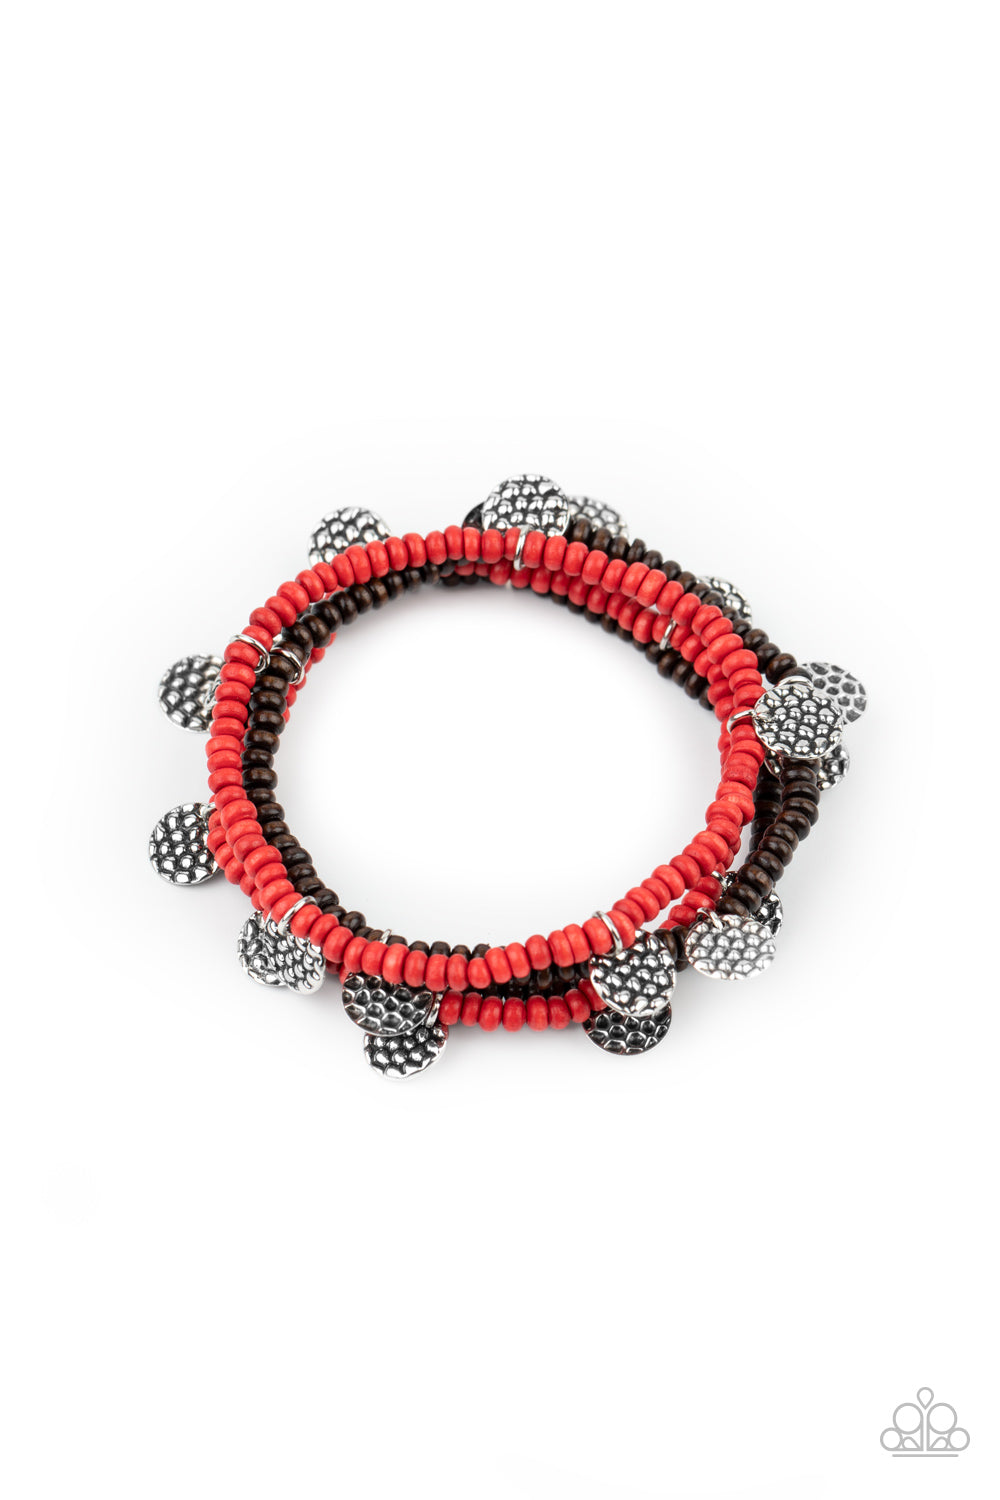 &lt;P&gt; Infused with hammered silver discs, a dainty collection of brown and red wooden beads are threaded along stretchy bands around the wrist, creating colorful layers. &lt;/P&gt;

&lt;P&gt;&lt;I&gt; Sold as one set of four bracelets.&lt;/I&gt;&lt;/p&gt;


&lt;img src=\&quot;https://d9b54x484lq62.cloudfront.net/paparazzi/shopping/images/517_tag150x115_1.png\&quot; alt=\&quot;New Kit\&quot; align=\&quot;middle\&quot; height=\&quot;50\&quot; width=\&quot;50\&quot;/&gt;